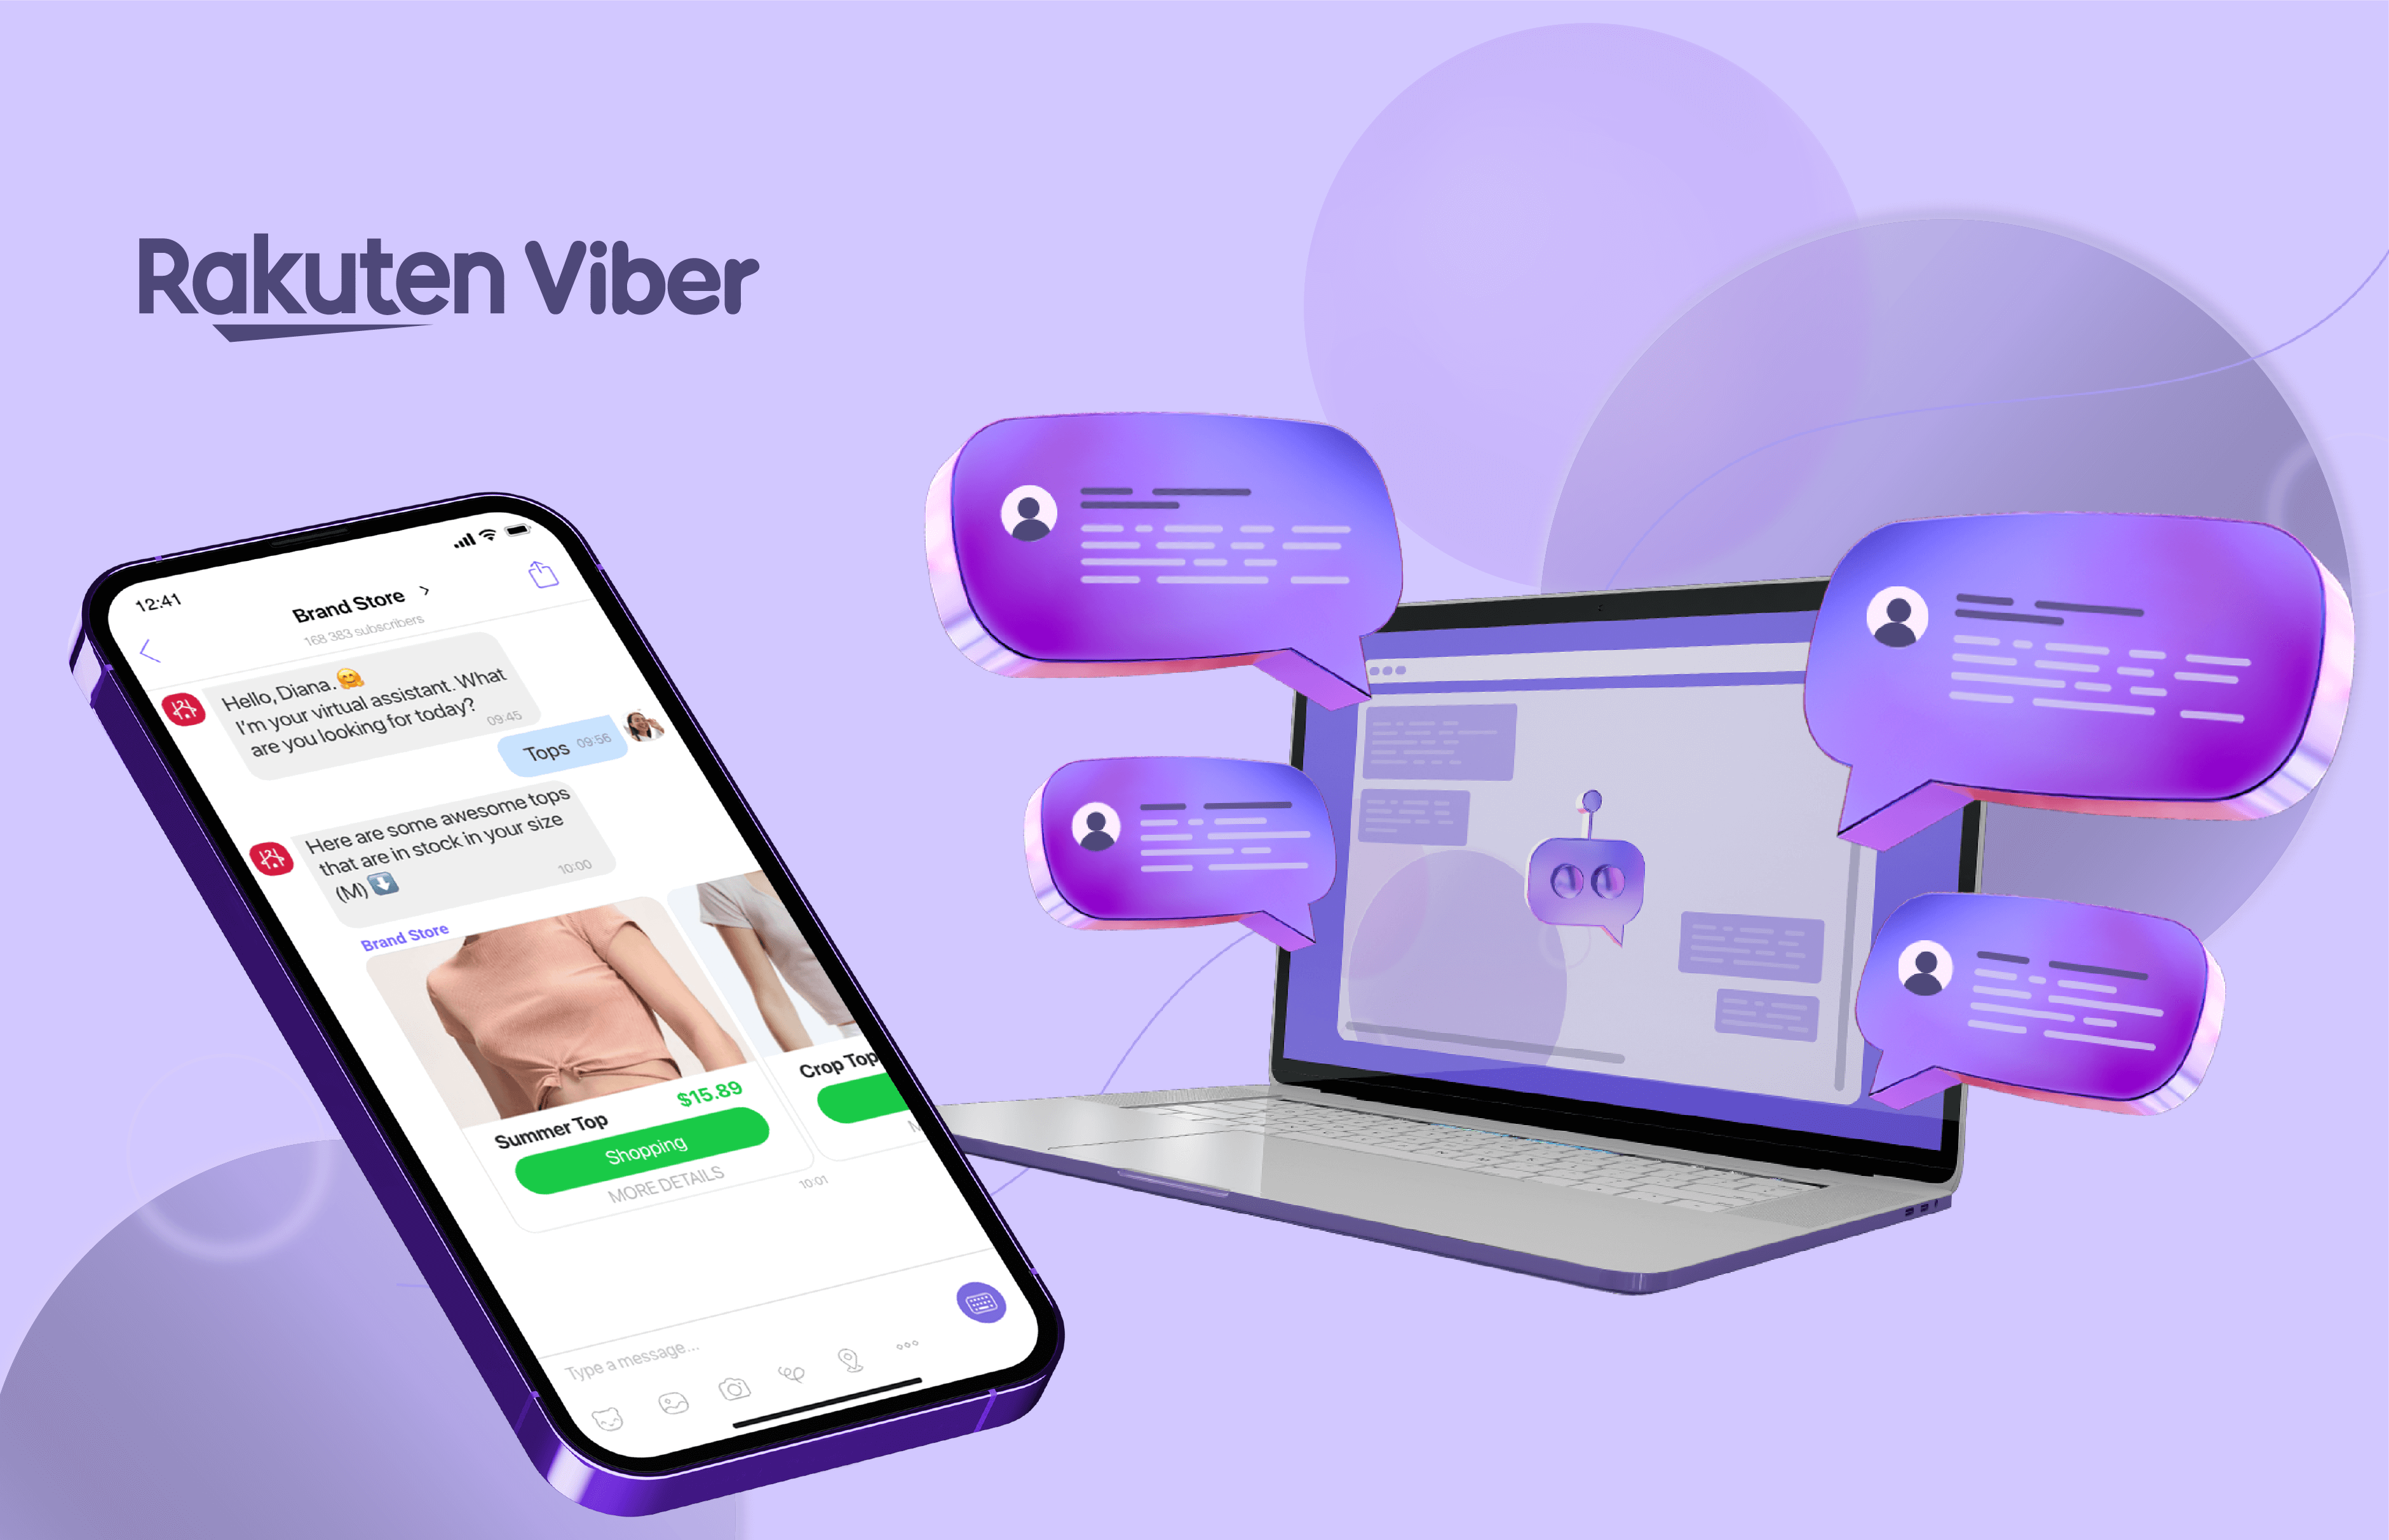 credit: https://www.forbusiness.viber.com/en/blog/post/the-chatbot-evolution-from-simple-interactions-to-sentient-like-conversations/